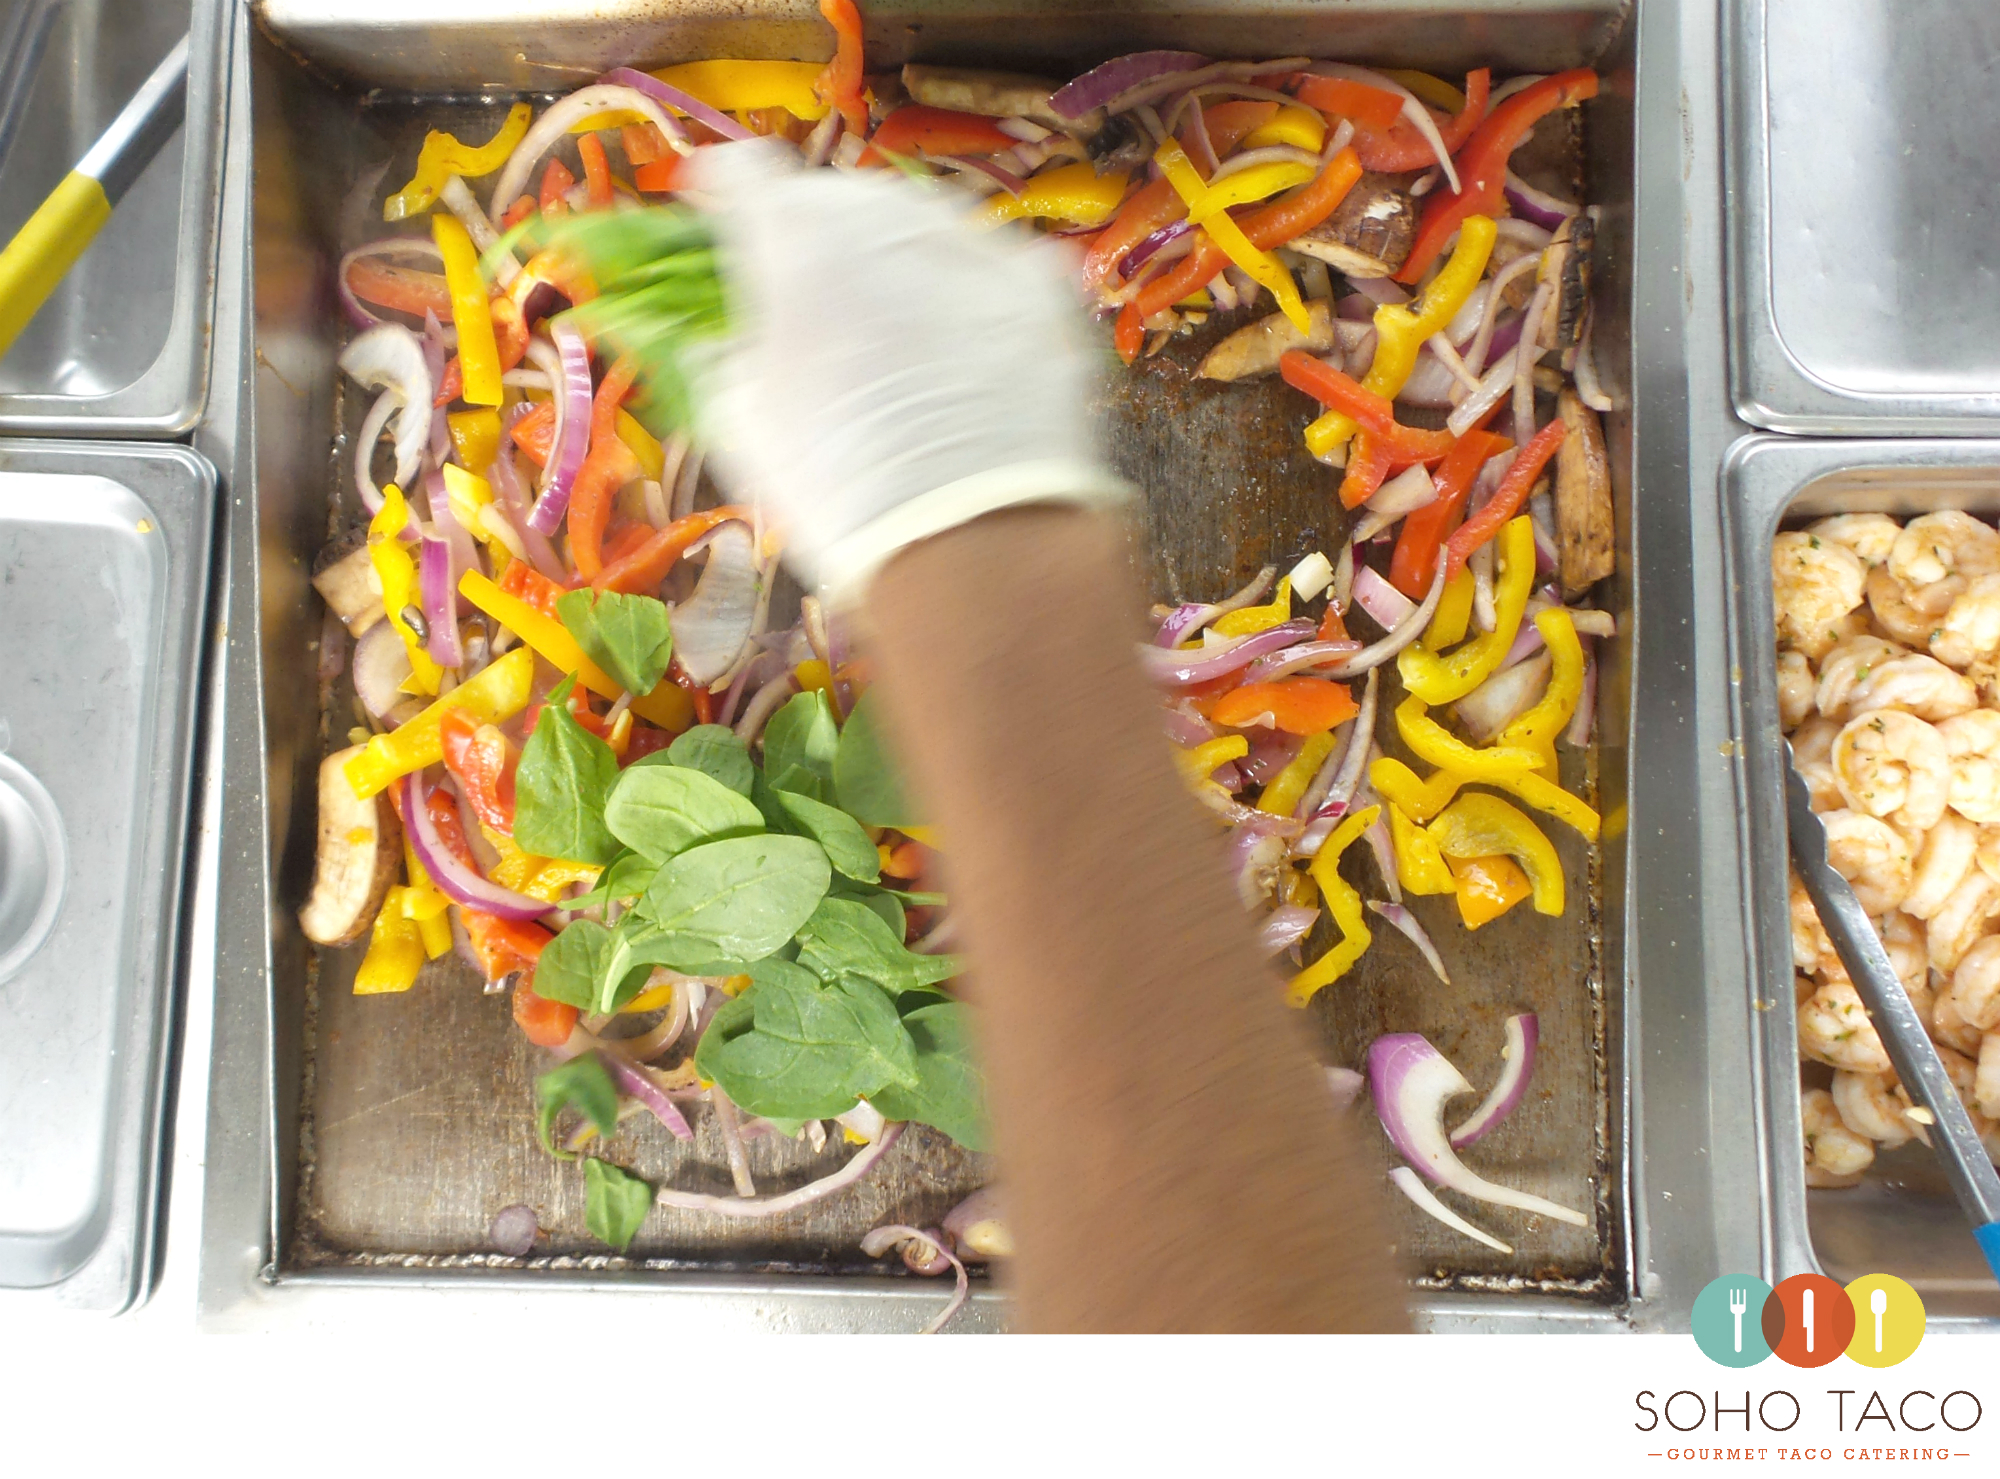 SOHO TACO Gourmet Taco Catering - Beverly Hills - Veggie Tacos - Grilling - Cooking - Los Angeles